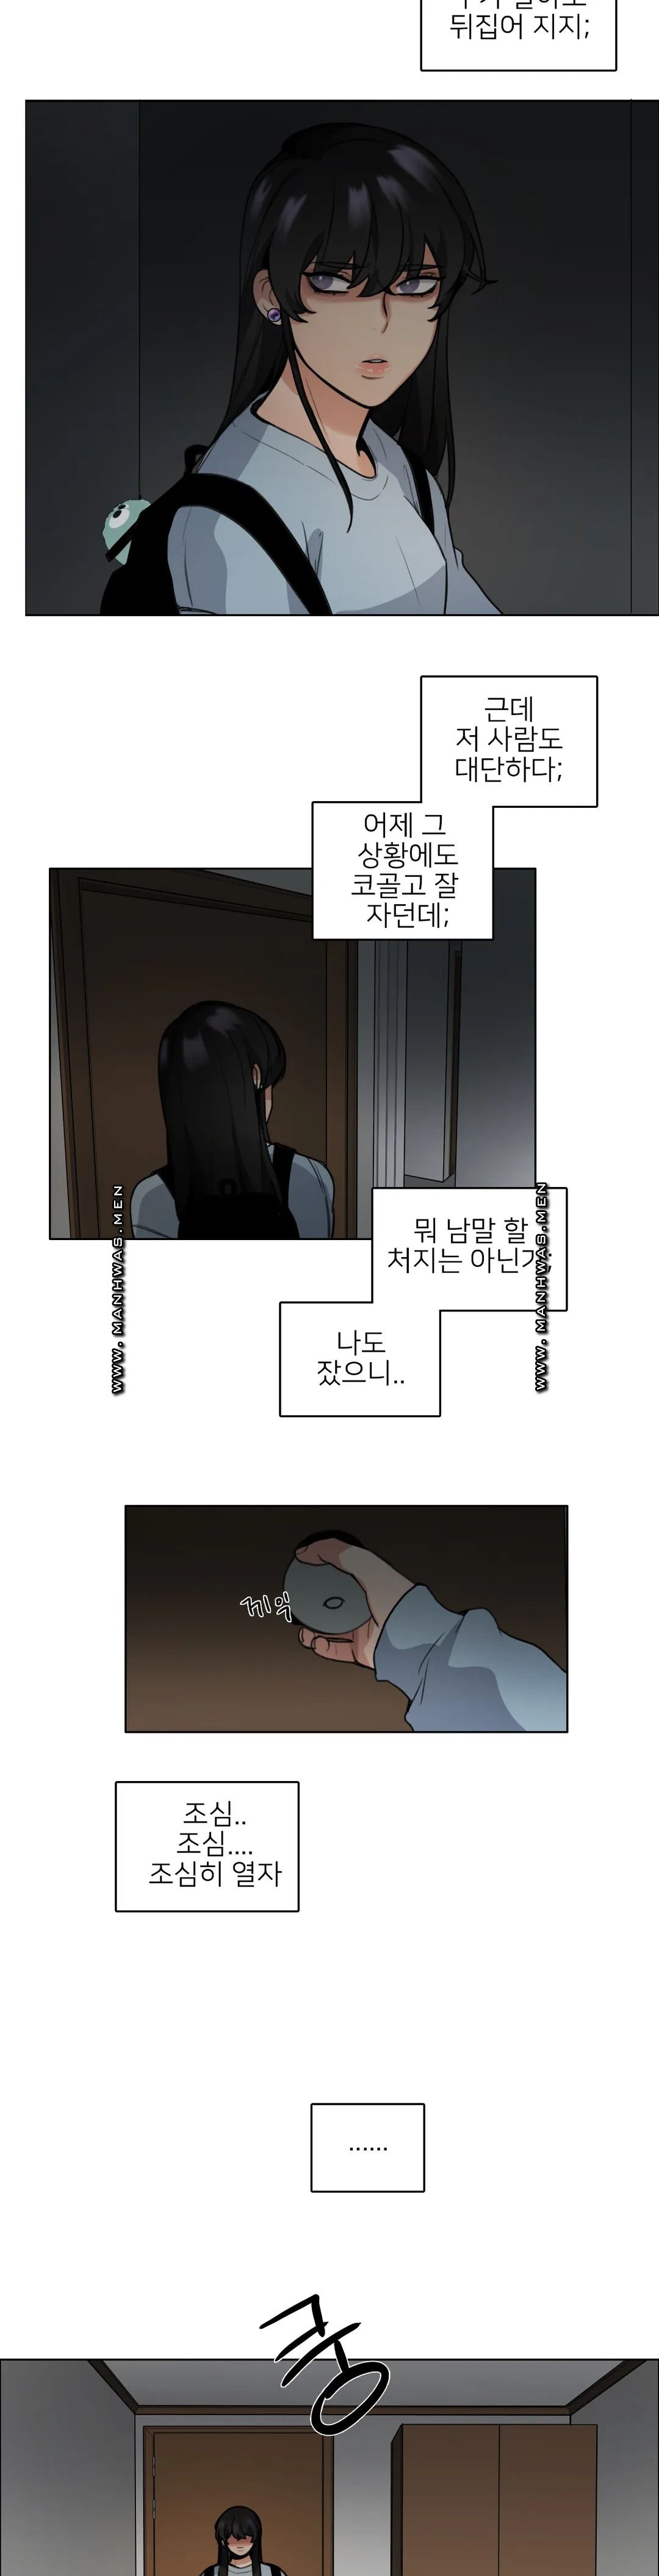 Wait Raw - Chapter 4 Page 3